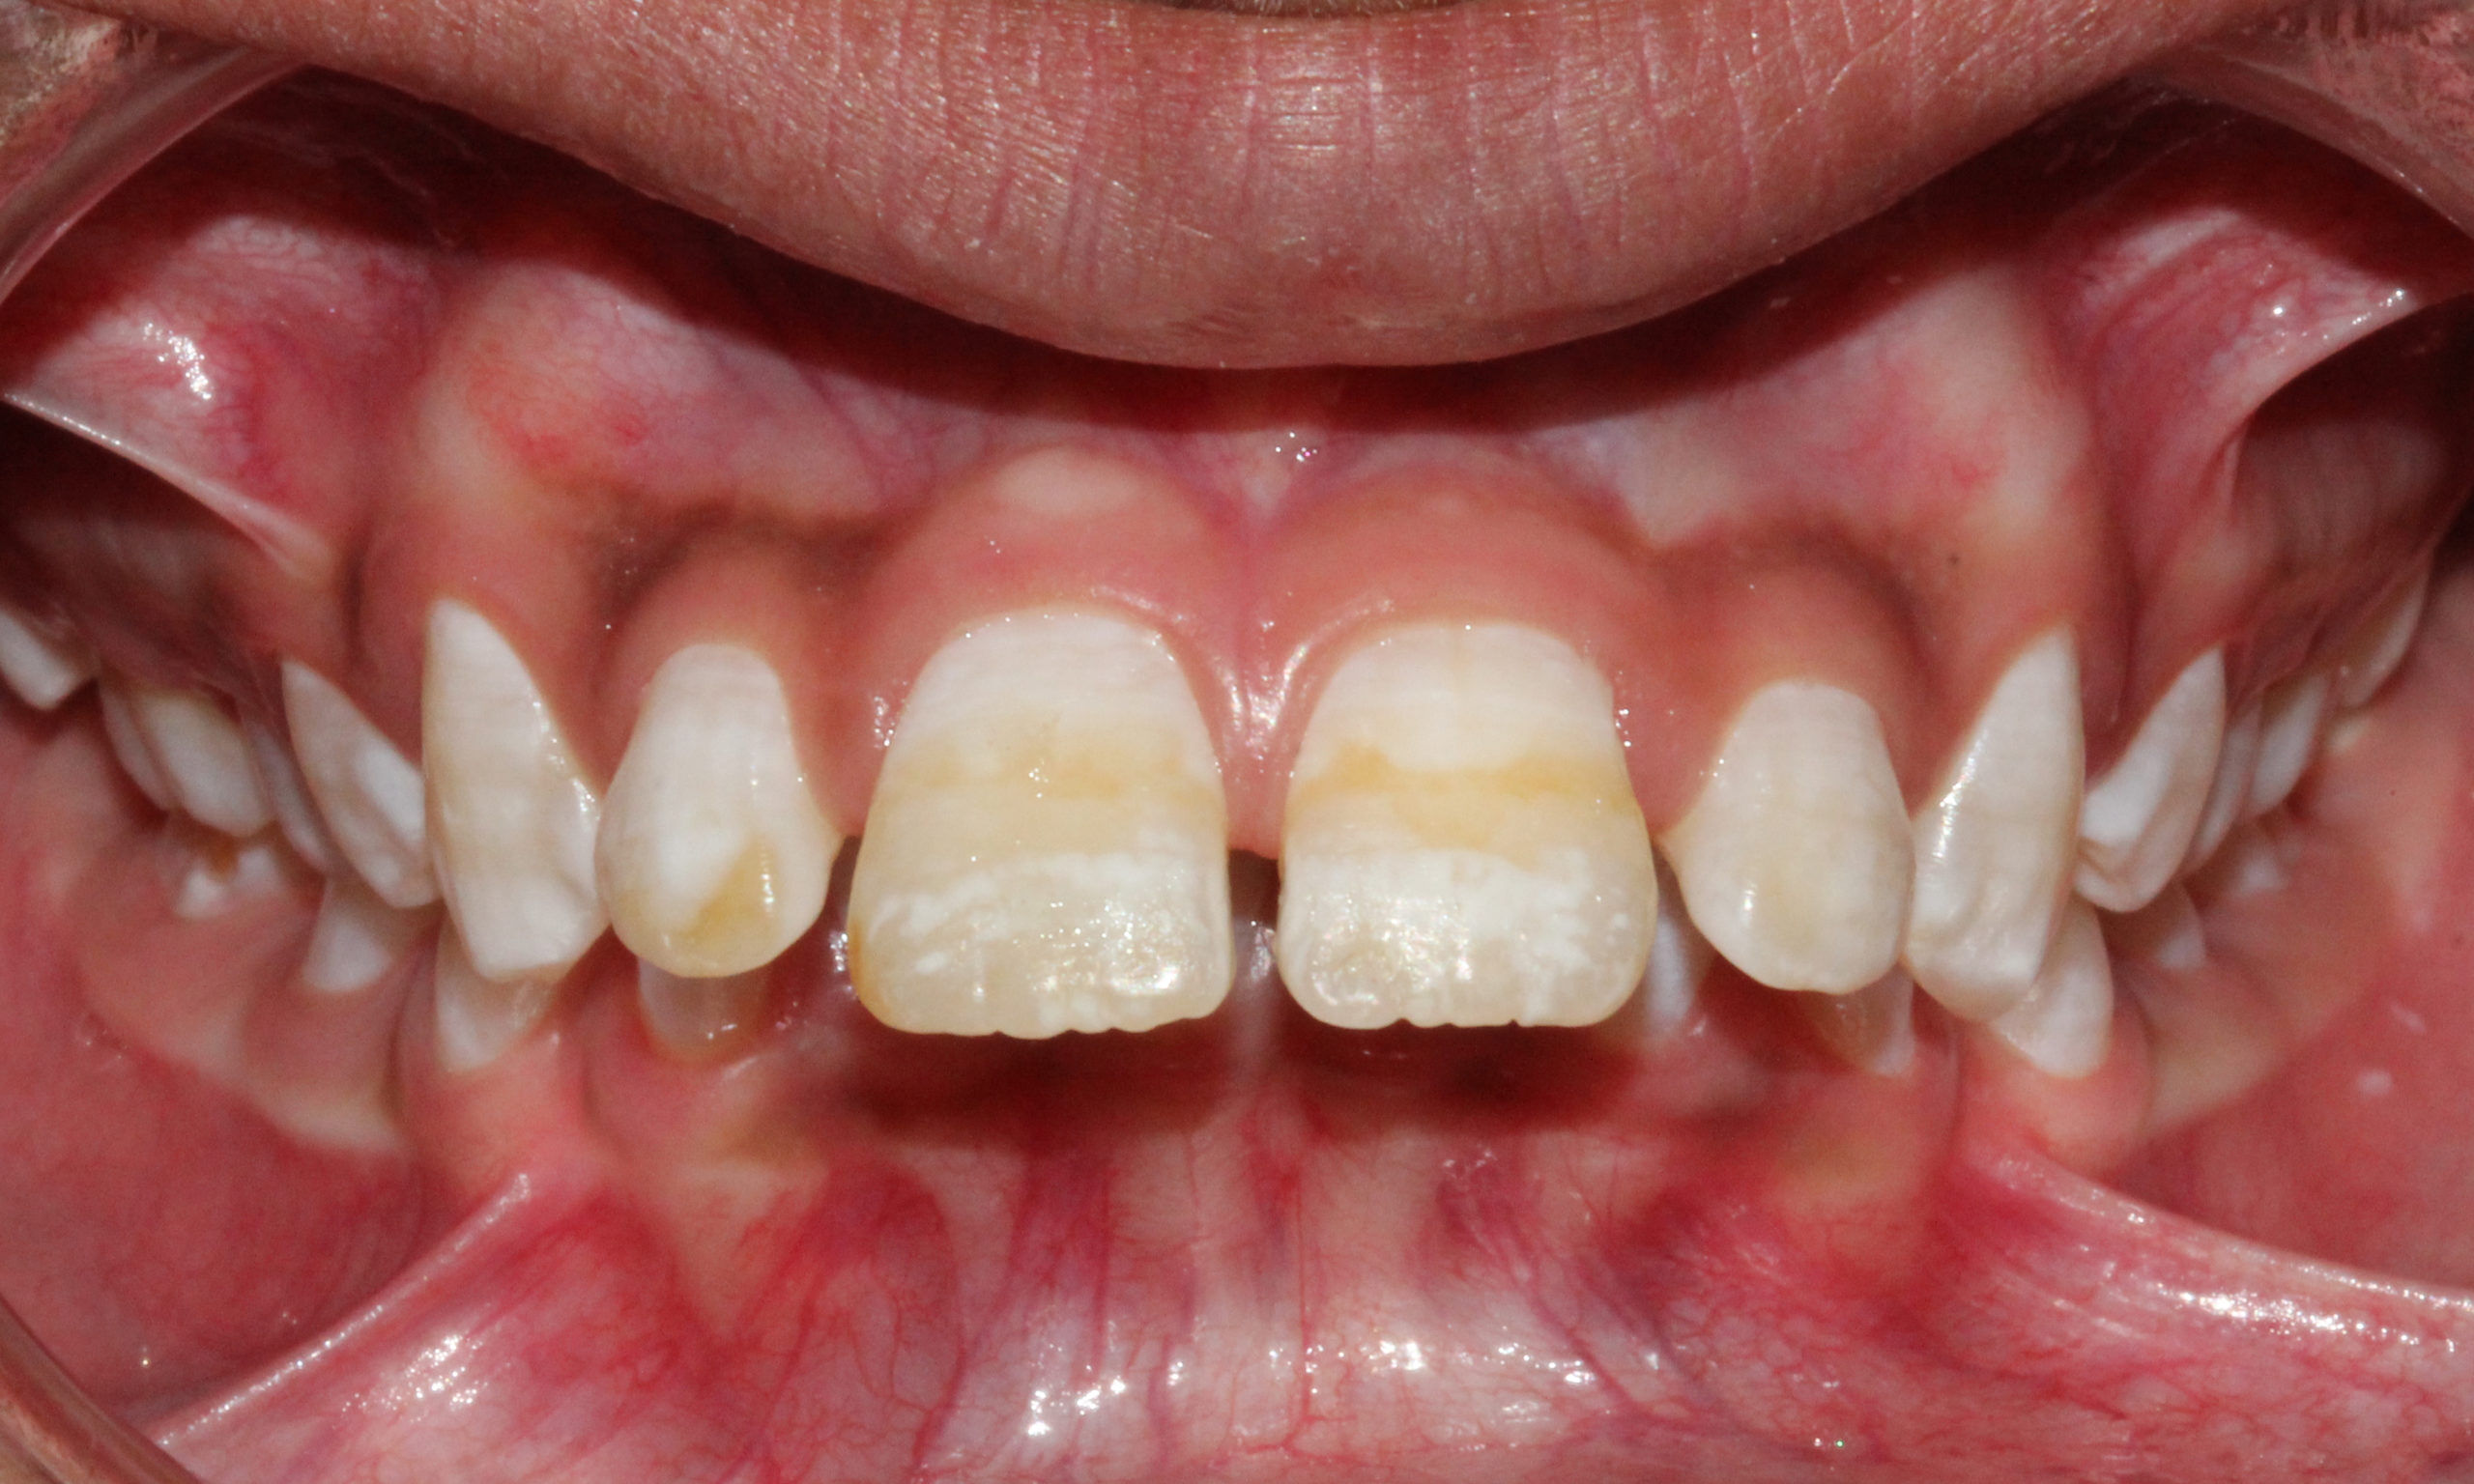 What are the symptoms of Fluorosis